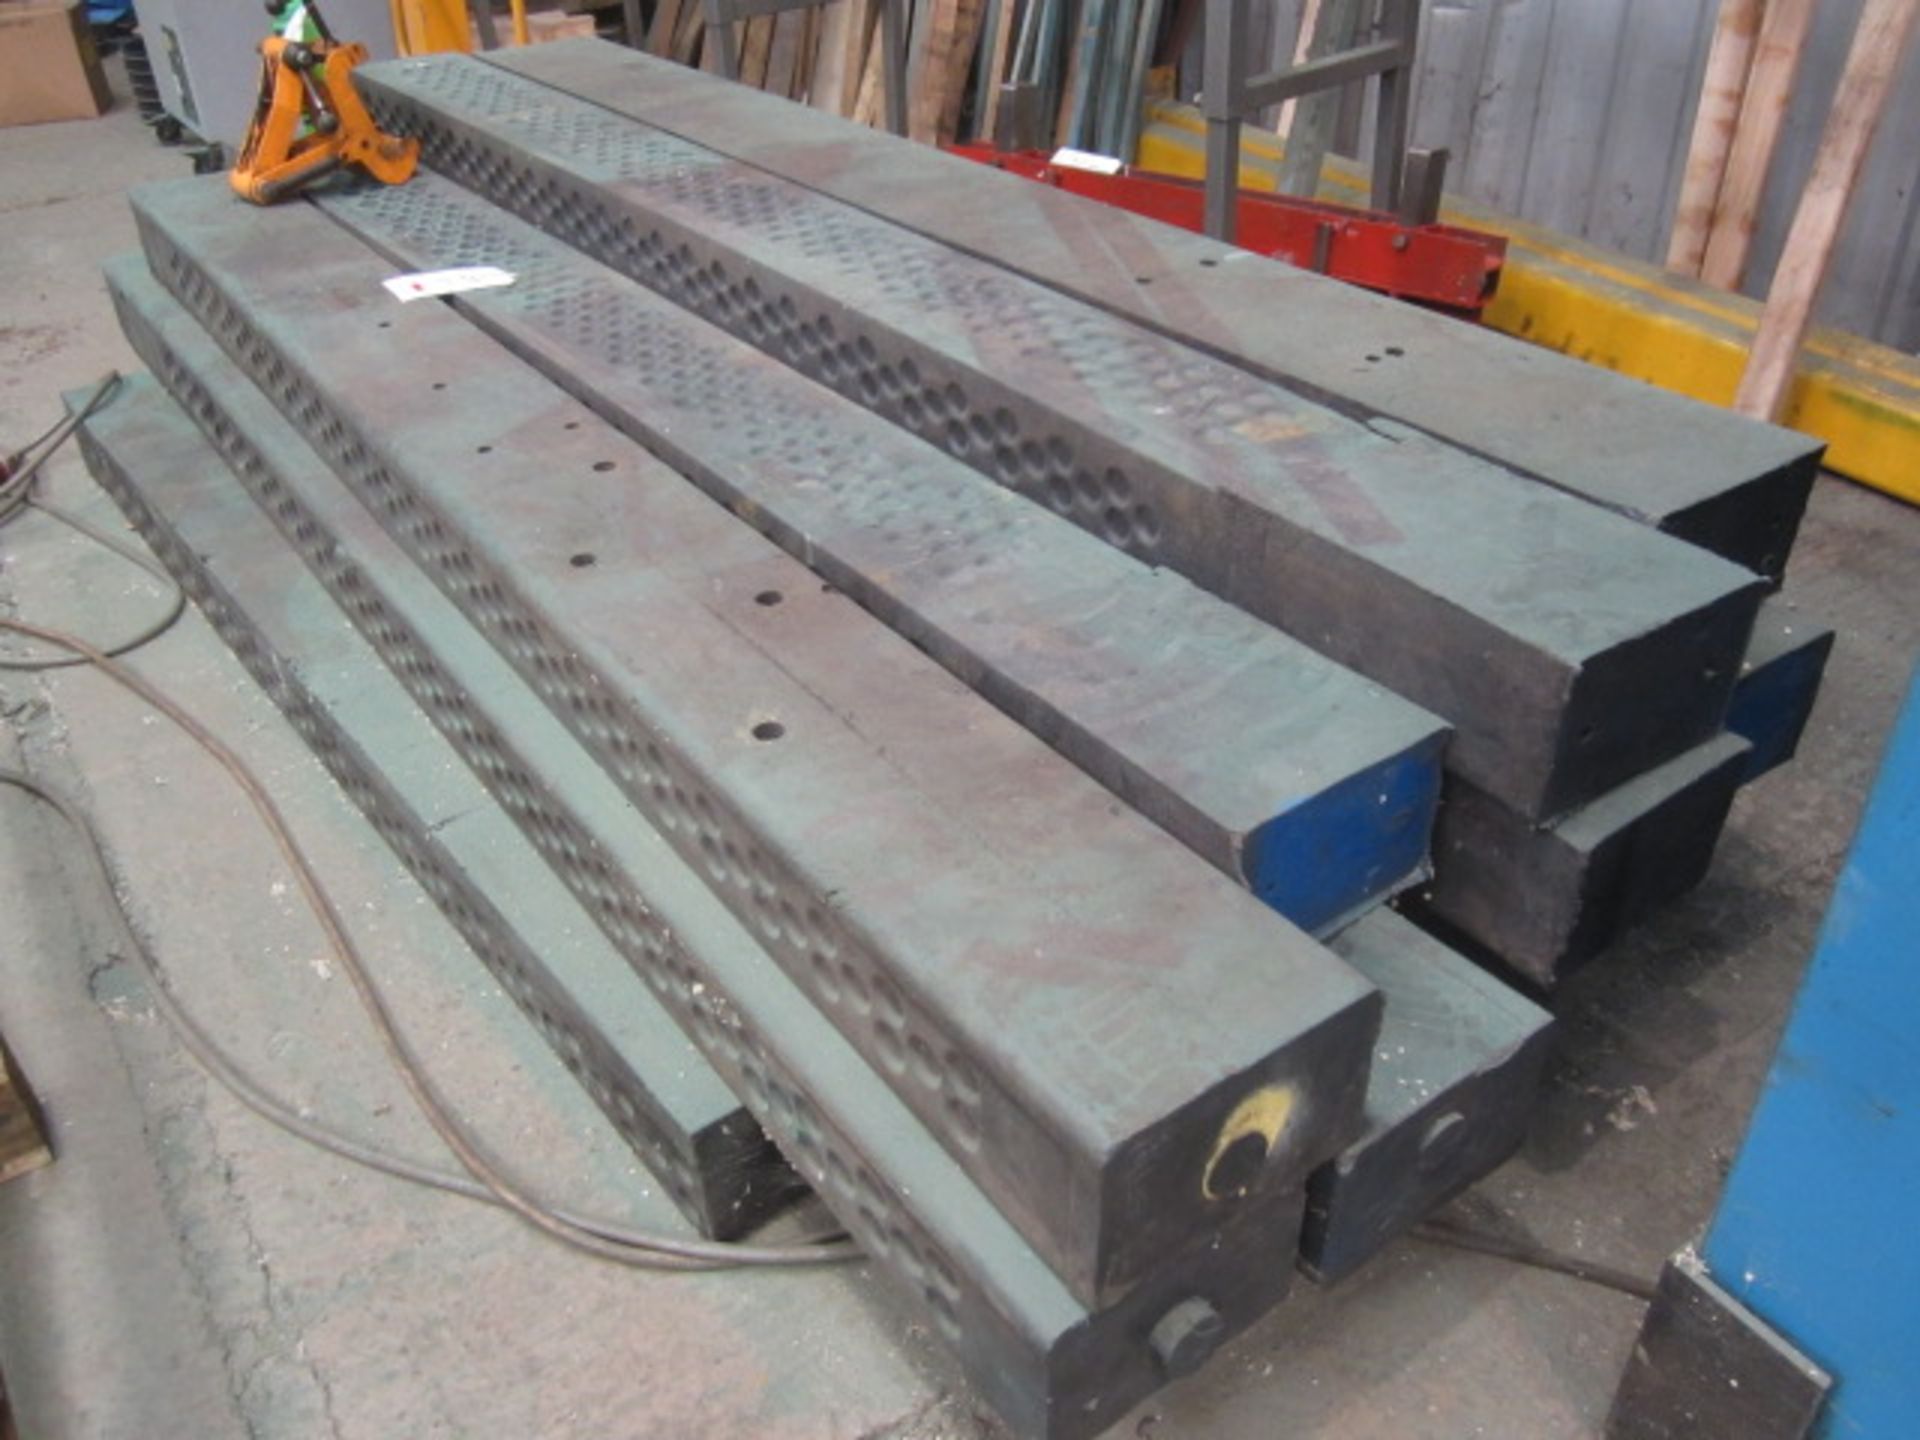 Quantity of various length plastic railway sleepers, as lotted - please refer to auction images